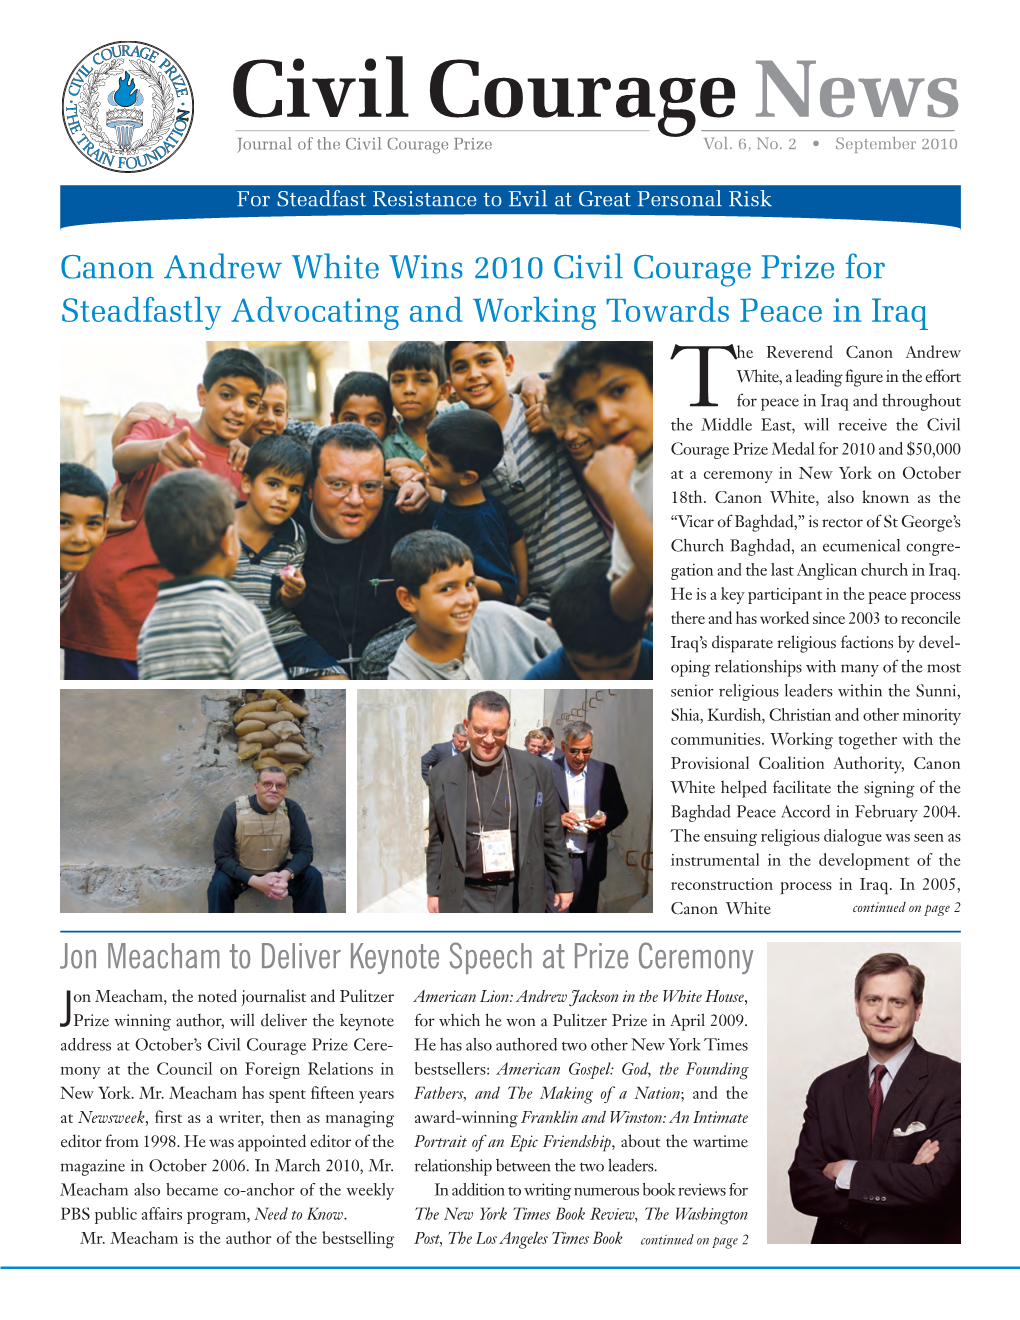 Civil Courage Newsletter 8/20/10 4:39 PM Page 1 Civil Courage News Journal of the Civil Courage Prize Vol